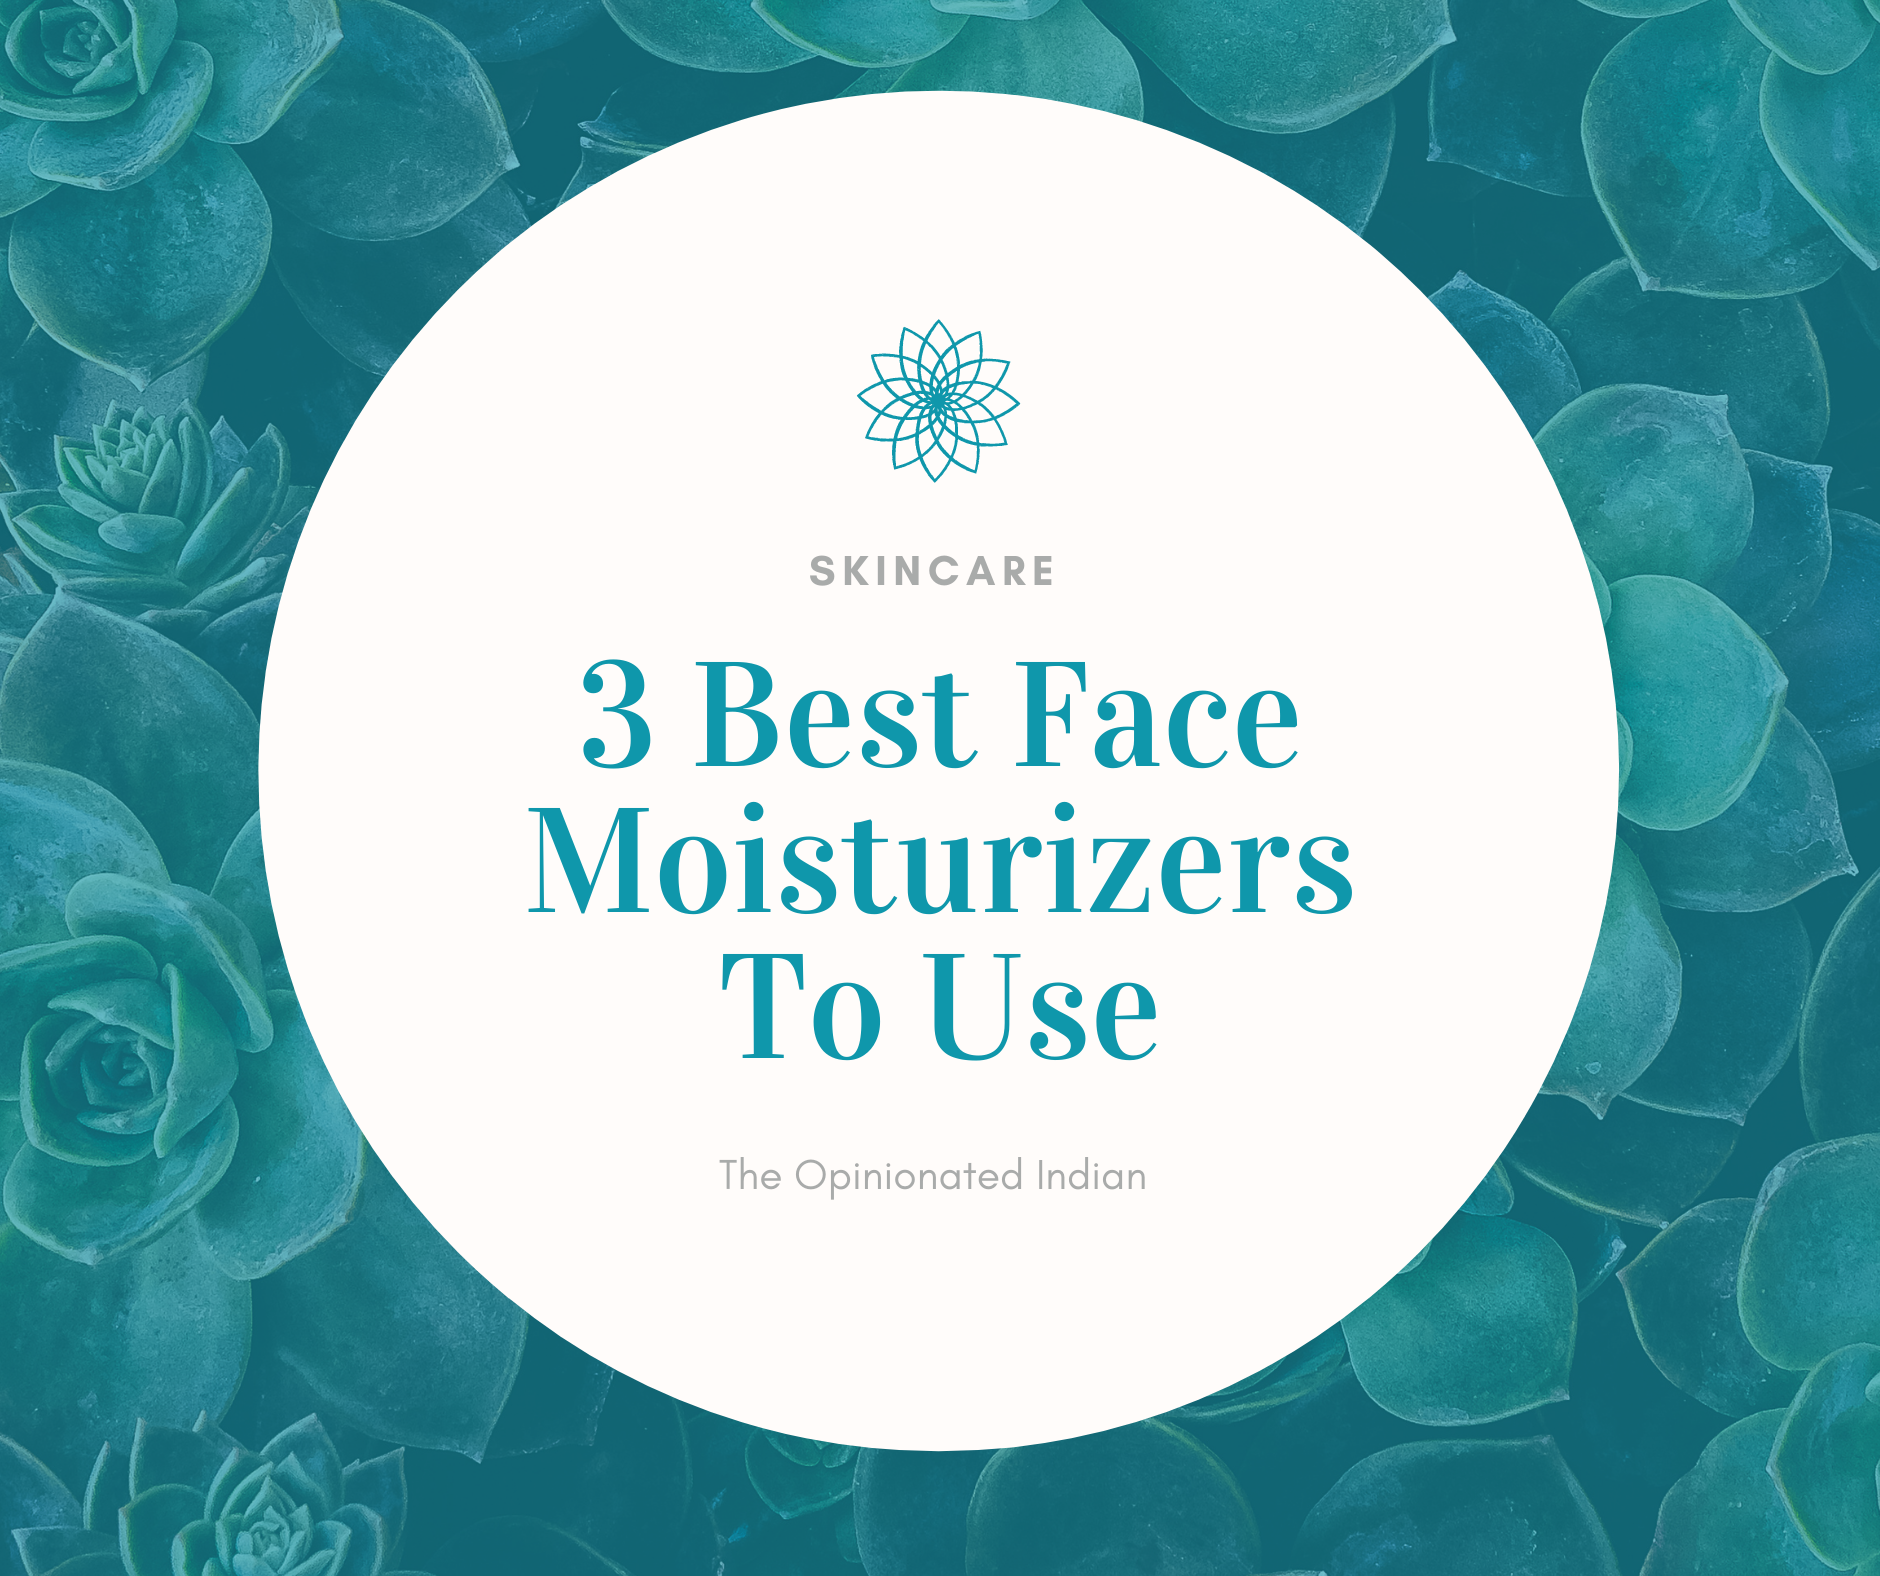 3 Best Face Moisturizers To Use